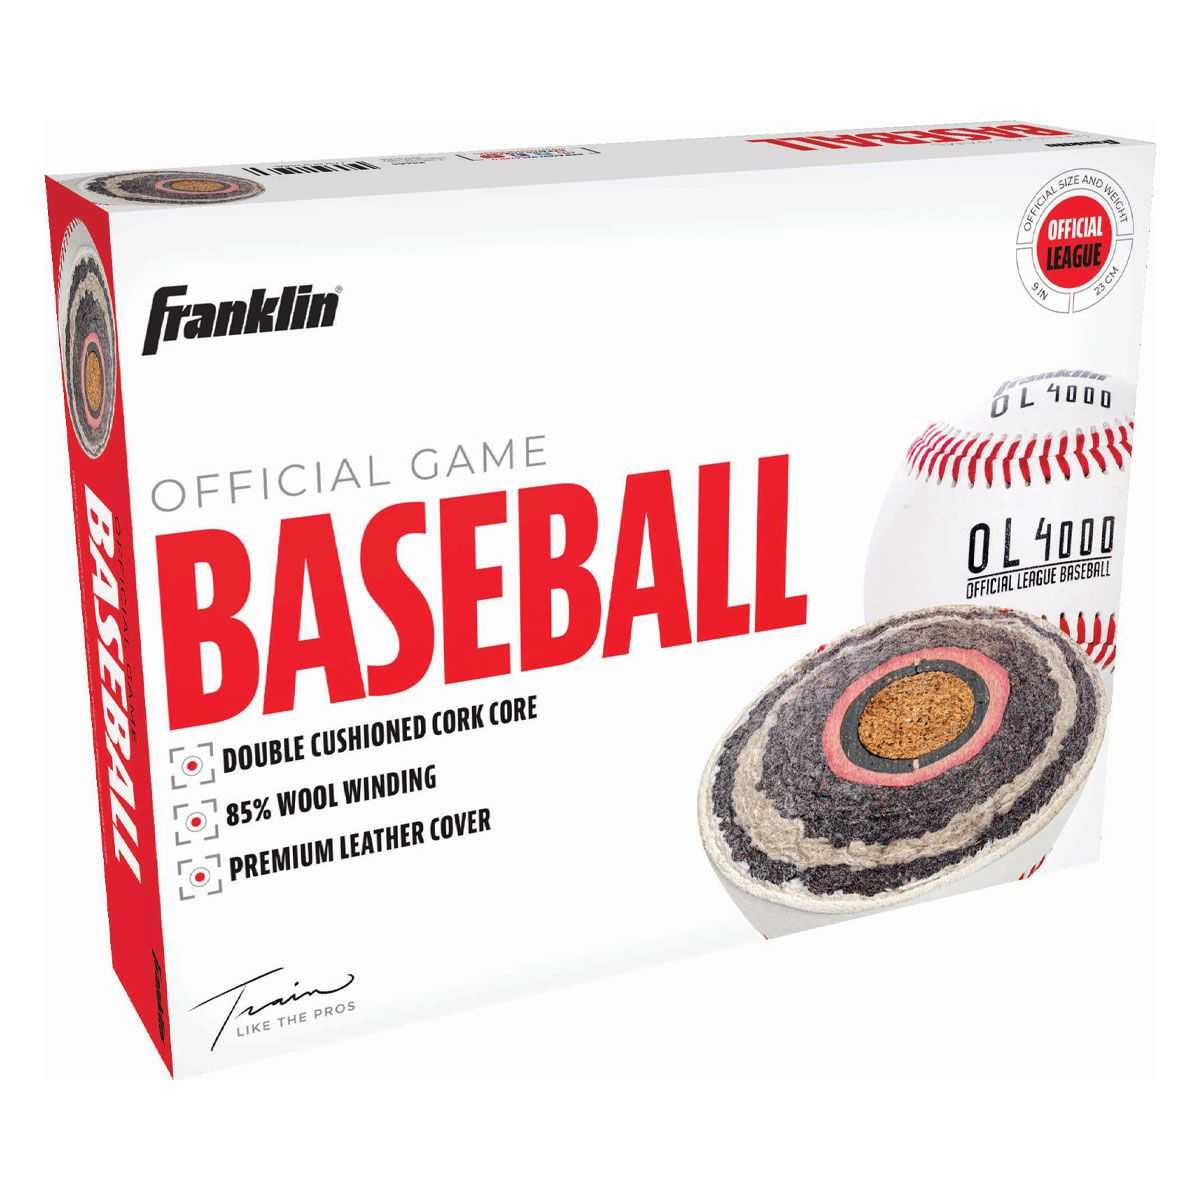 ﻿Franklin OL4000 Official Game Baseballs 1 ball - White - HIT a Double - 1